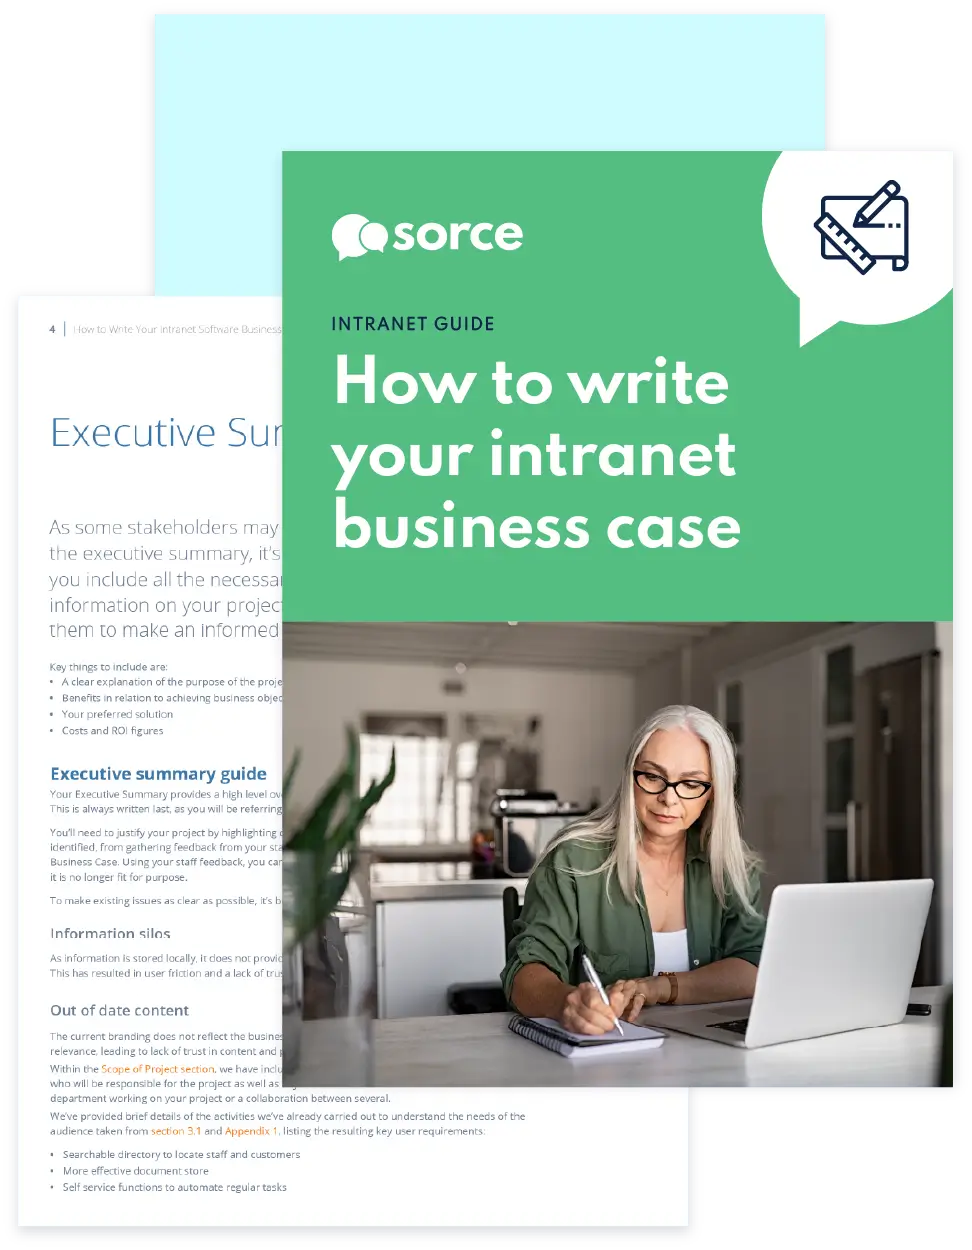 How to write your business case intranet guide